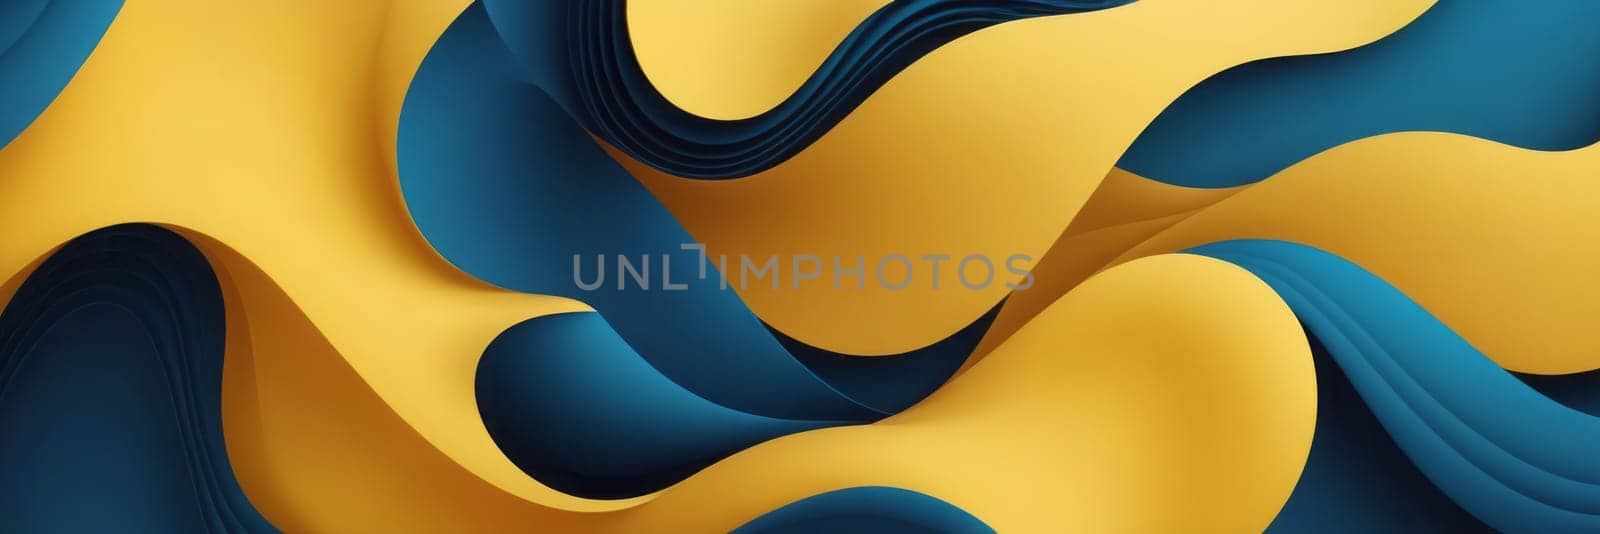 Organic Shapes in Yellow and Cadet blue by nkotlyar